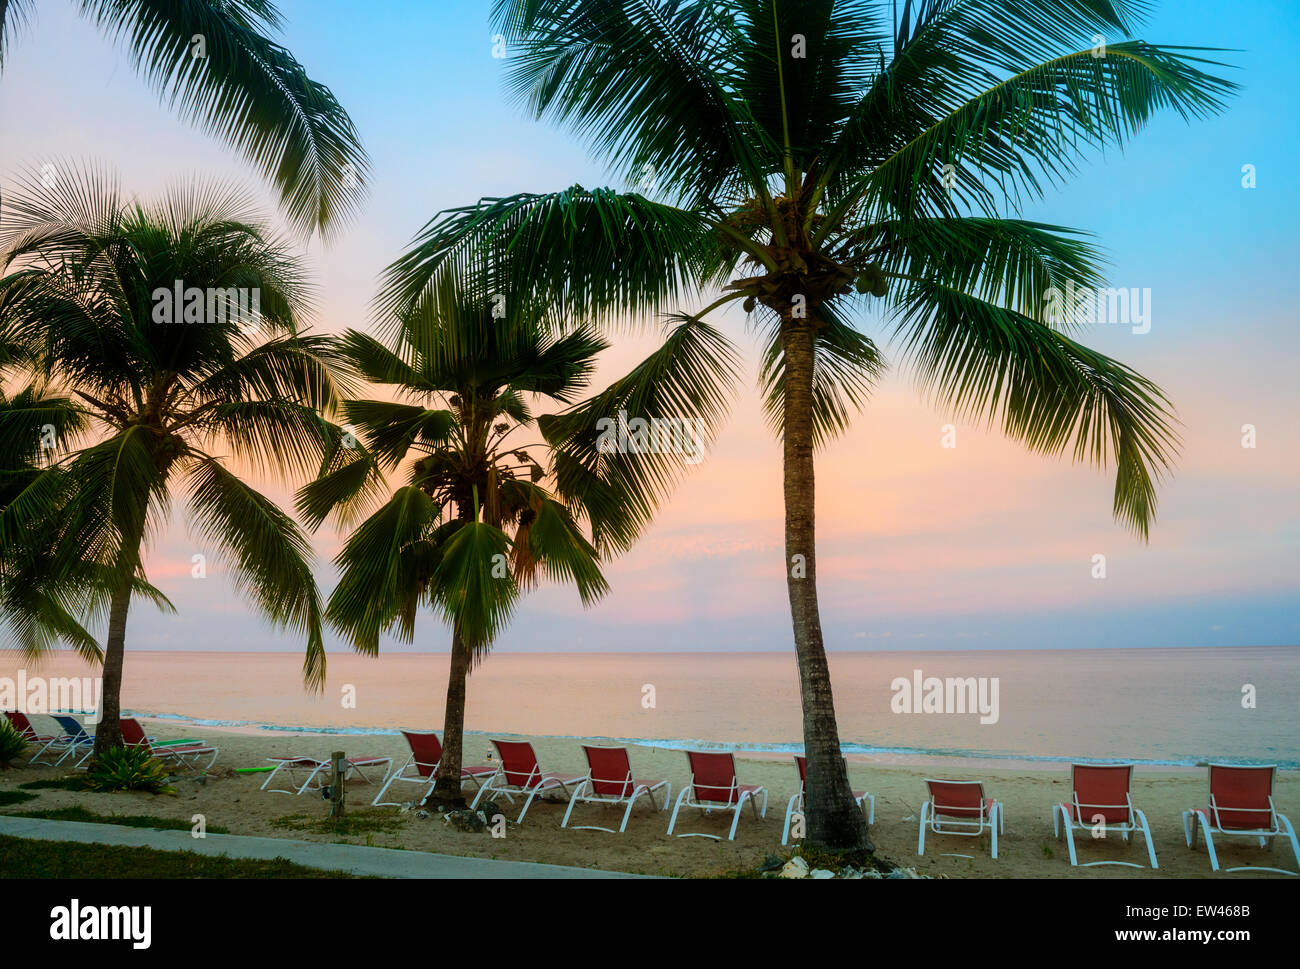 Sunrise paints delicate colors over the Caribbean on the isle of St. Croix, U.S. Virgin Islands. Beach, palms, beach chairs. Stock Photo